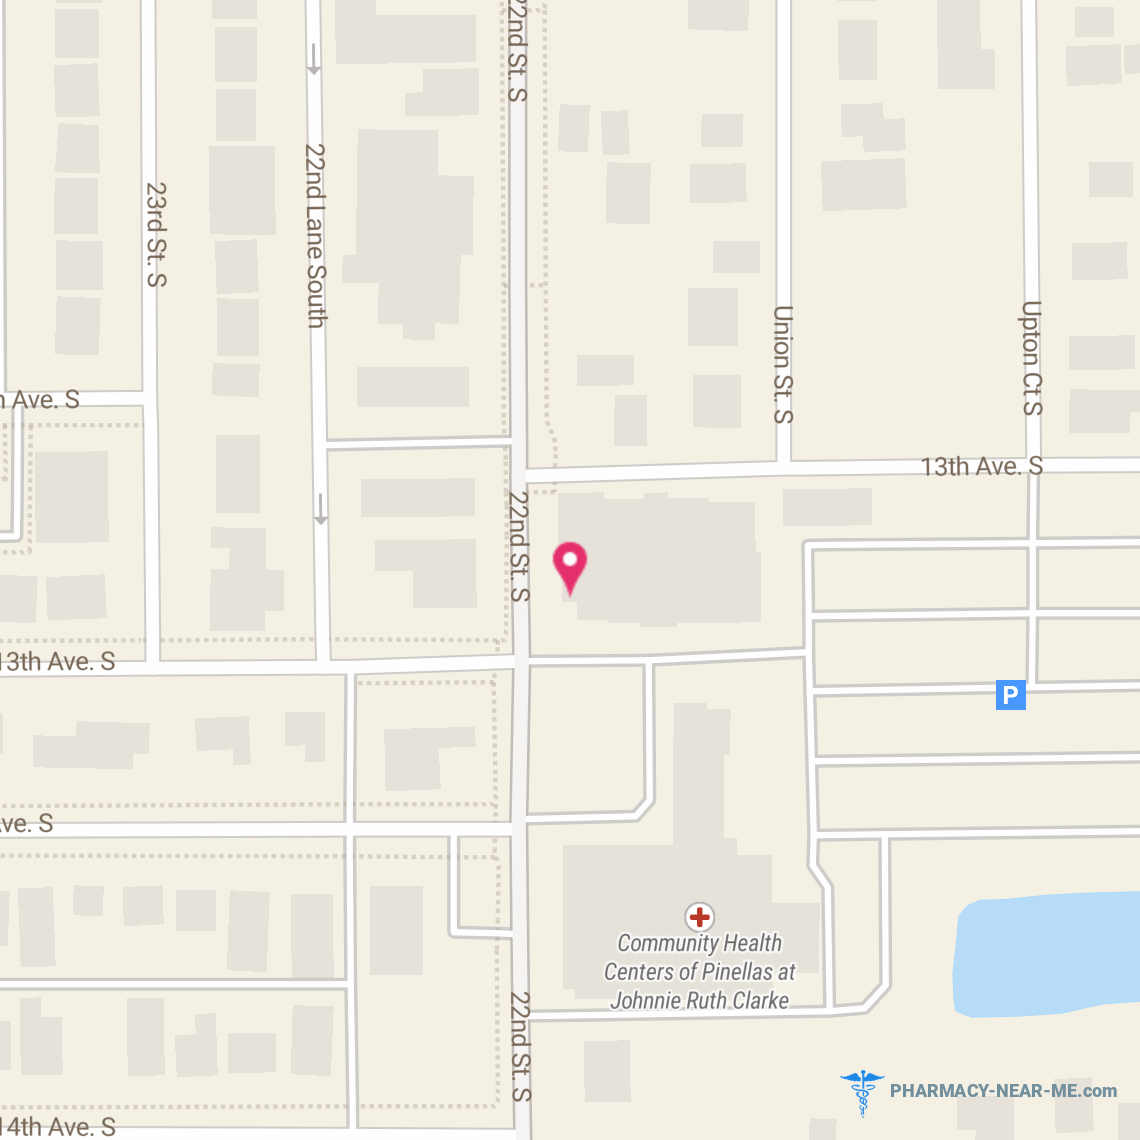 COMMUNITY HEALTH CENTERS OF PINELLAS INC. - Pharmacy Hours, Phone, Reviews & Information: 1344 22nd Street South, St. Petersburg, Florida 33712, United States